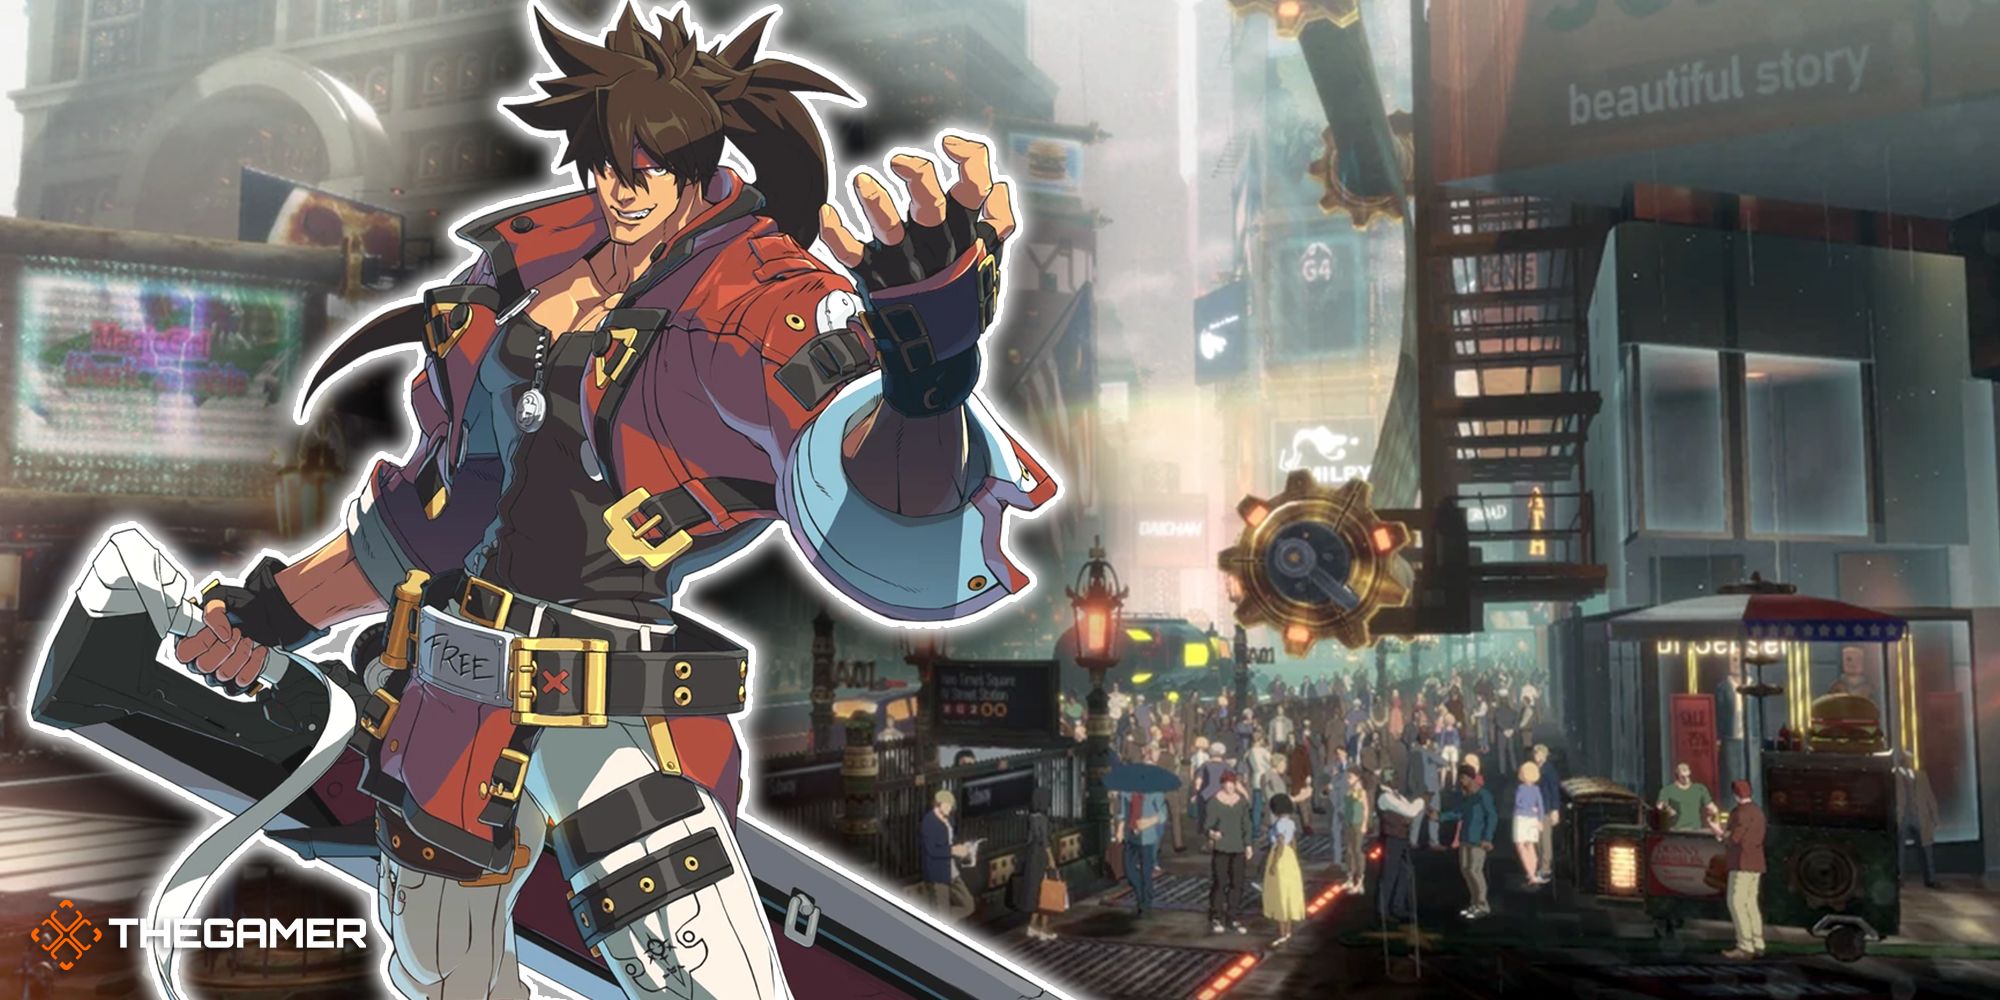 Game art and screen from Guilty Gear Strive.